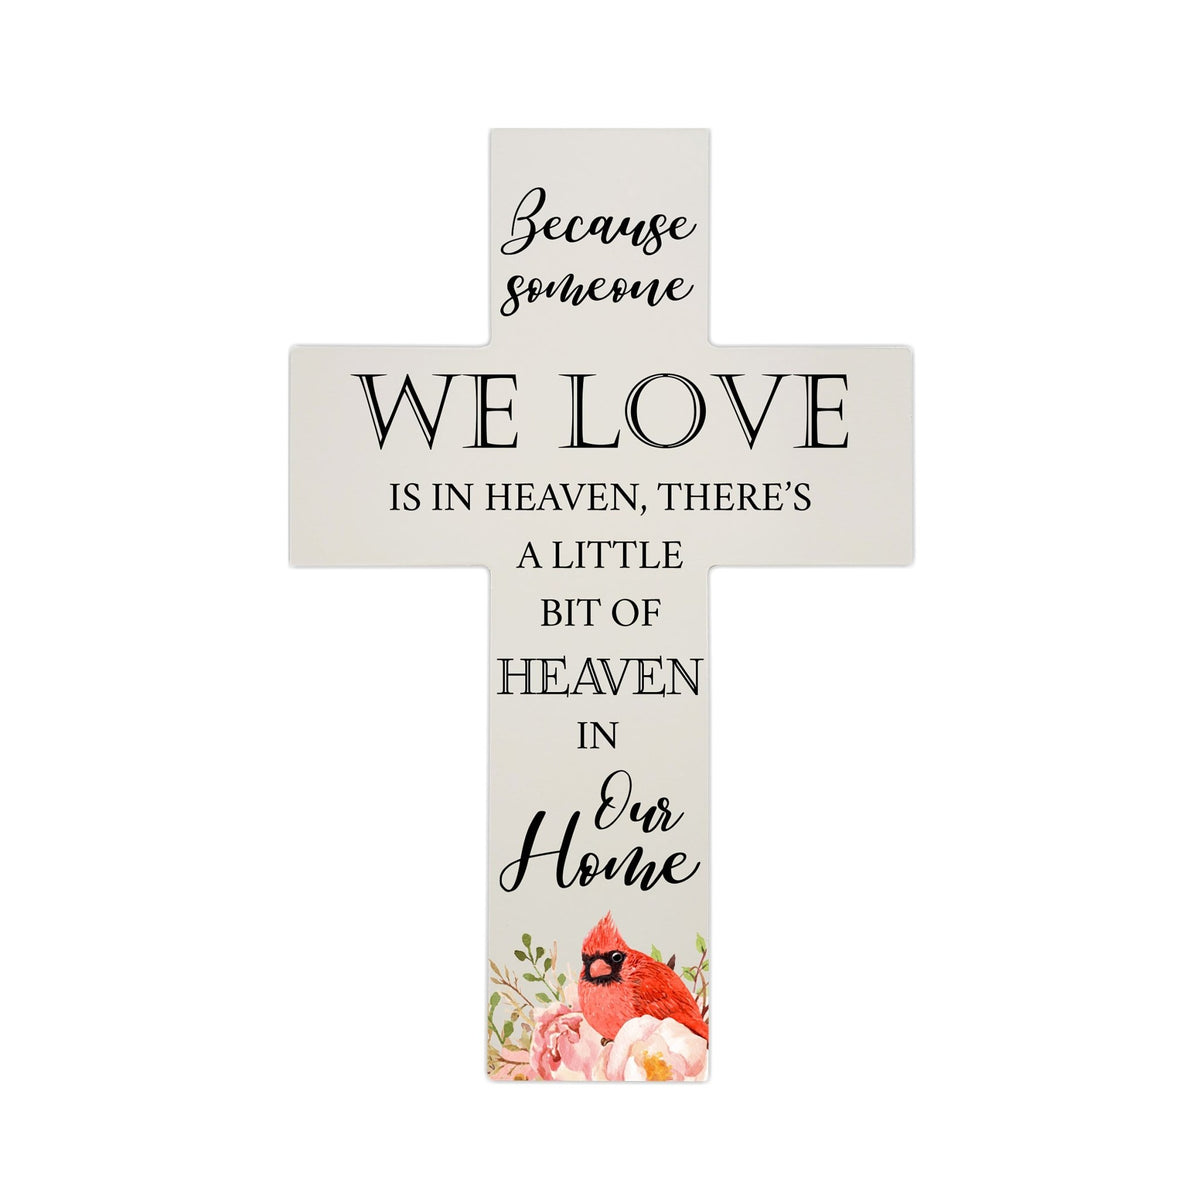 Red Cardinal Memorial Wall Cross For Loss of Loved One Because Someone We Love (Cardinal) Quote Bereavement Keepsake 14 x 9.25 Because Someone We Love Is In Heaven, There&#39;s A Little Bit Of Heaven In Our Home - LifeSong Milestones